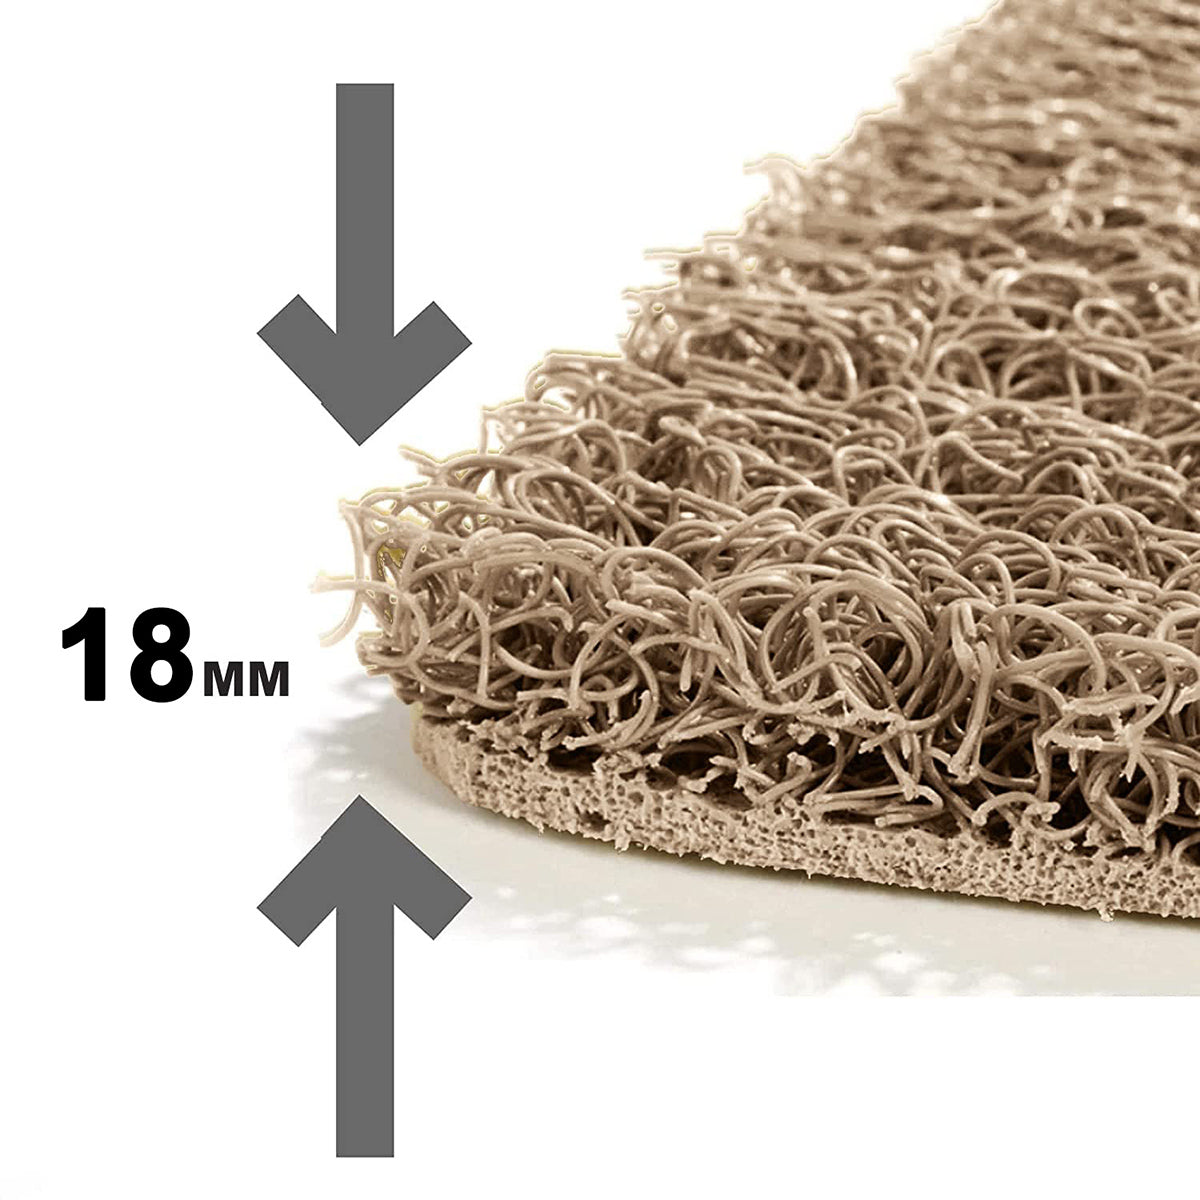 Oshotto Anti Skid Curly Noodle Grass 18mm Car Foot/Floor Mats for All Cars (Set of 5, Beige,Brown)